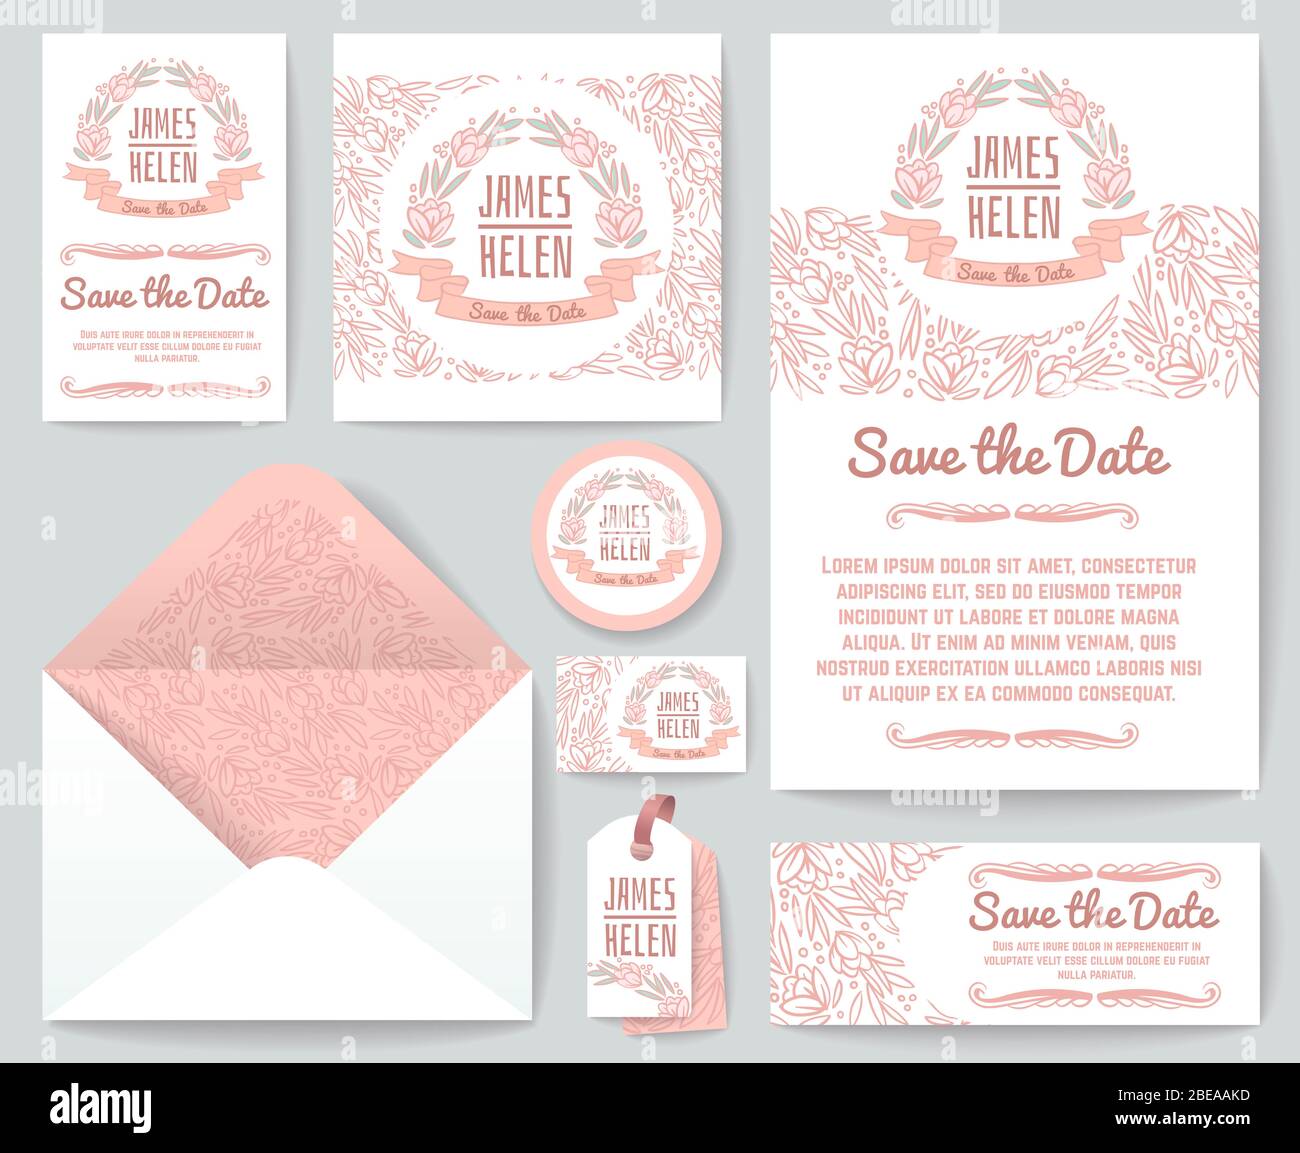 Vintage wedding invitation greeting cards vector template with hand drawn rustic floral elements and flowers. Invitation wedding and save the date with flower illustration Stock Vector